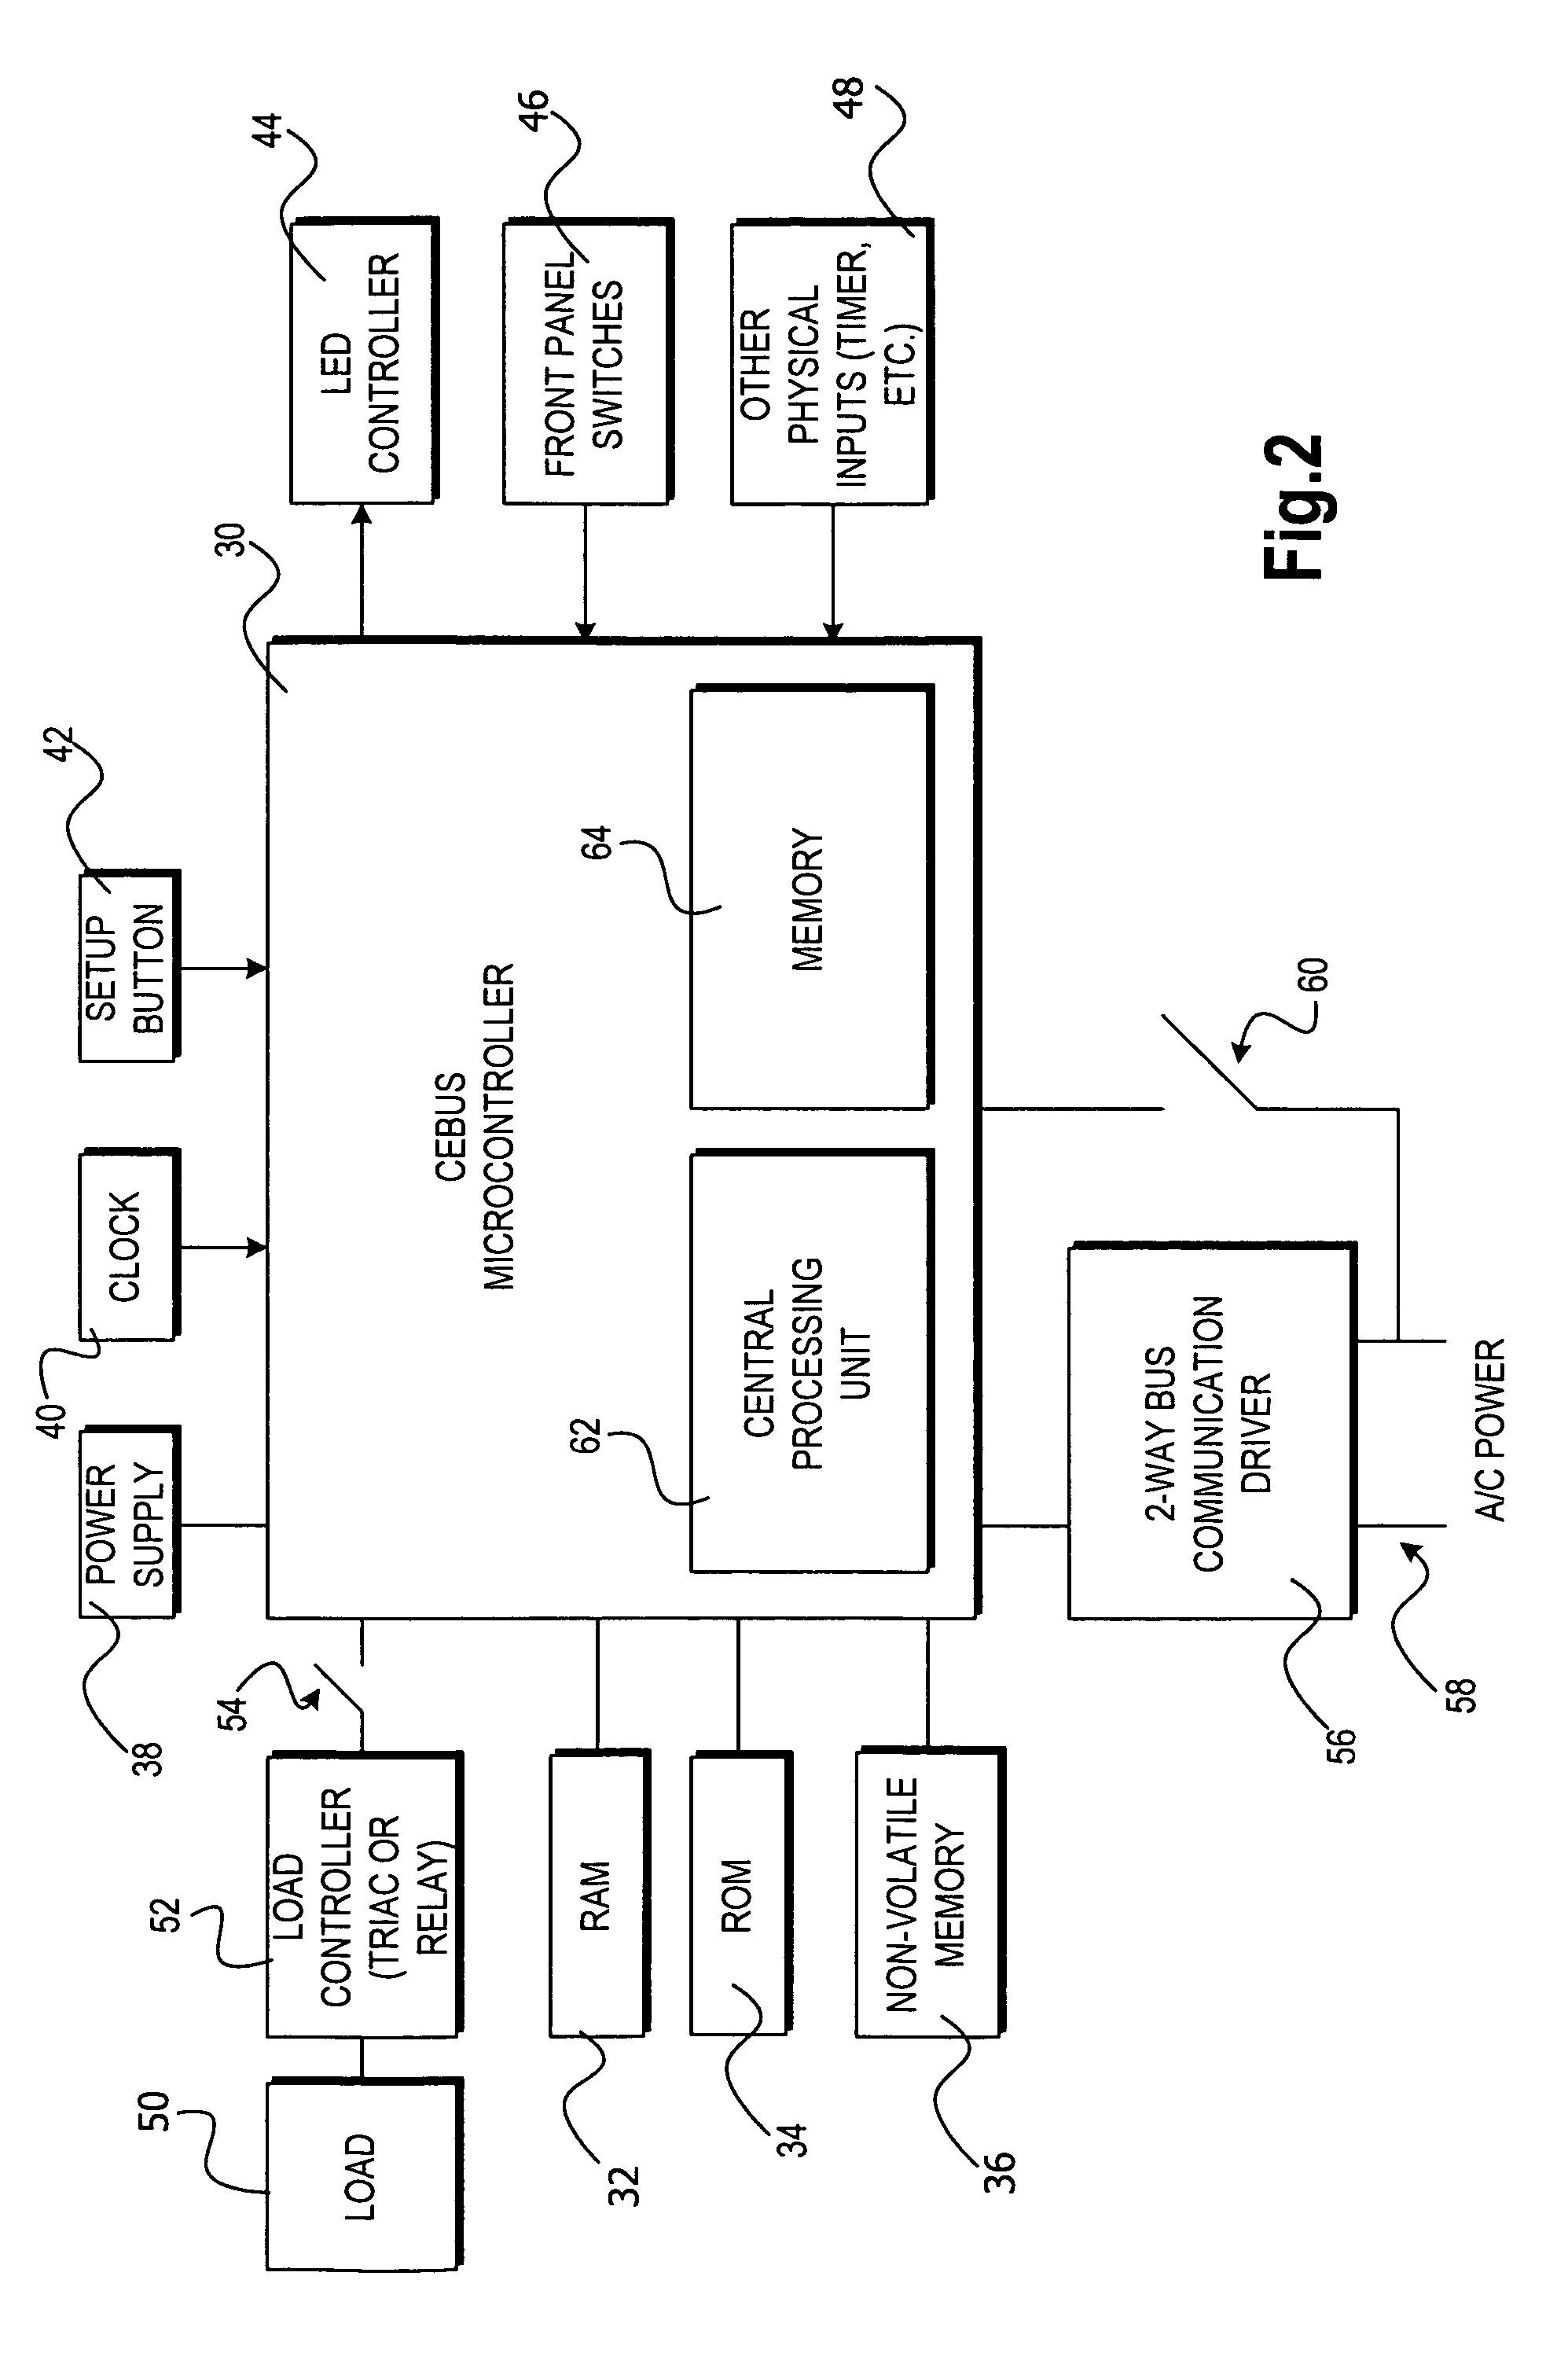 Method and apparatus for providing distributed scene programming of a home automation and control system